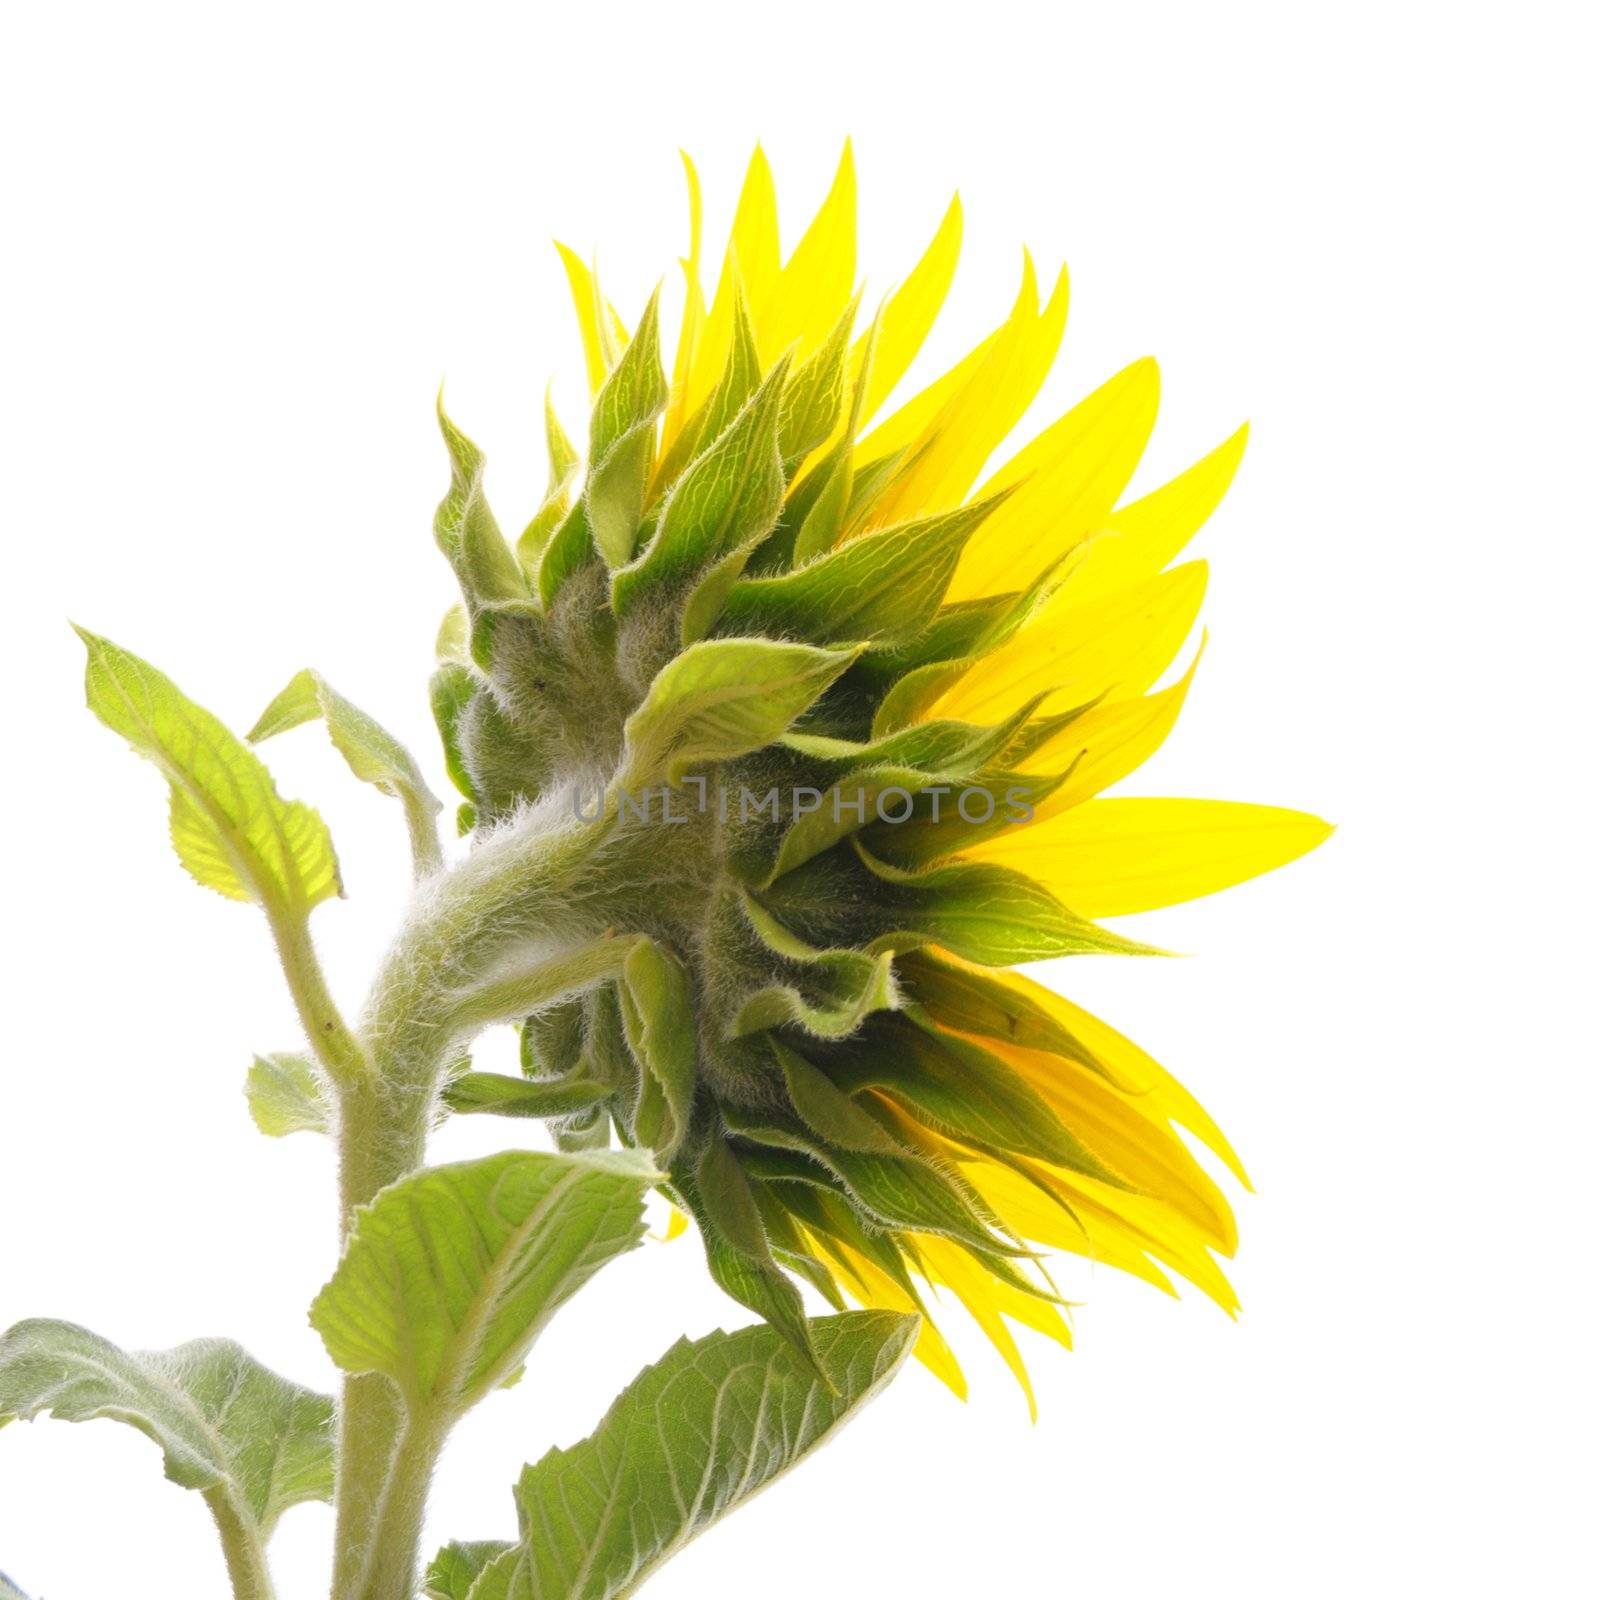 sunflower isolated on white background with copyspace